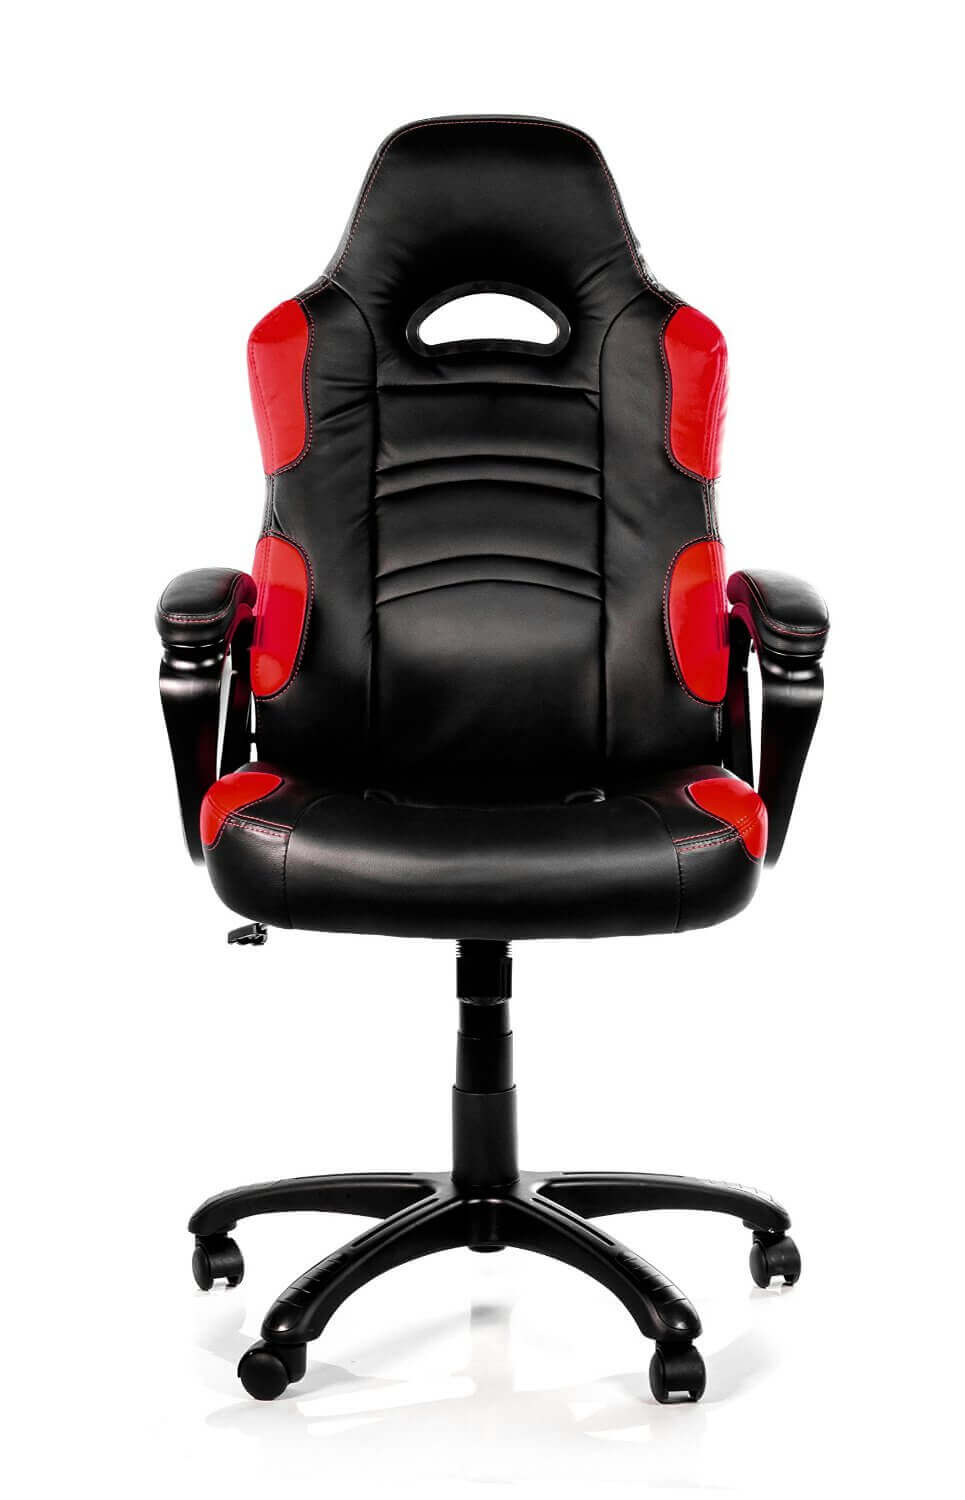 19 Best Gaming Chairs for PC (Feb 2018) Computer Gaming